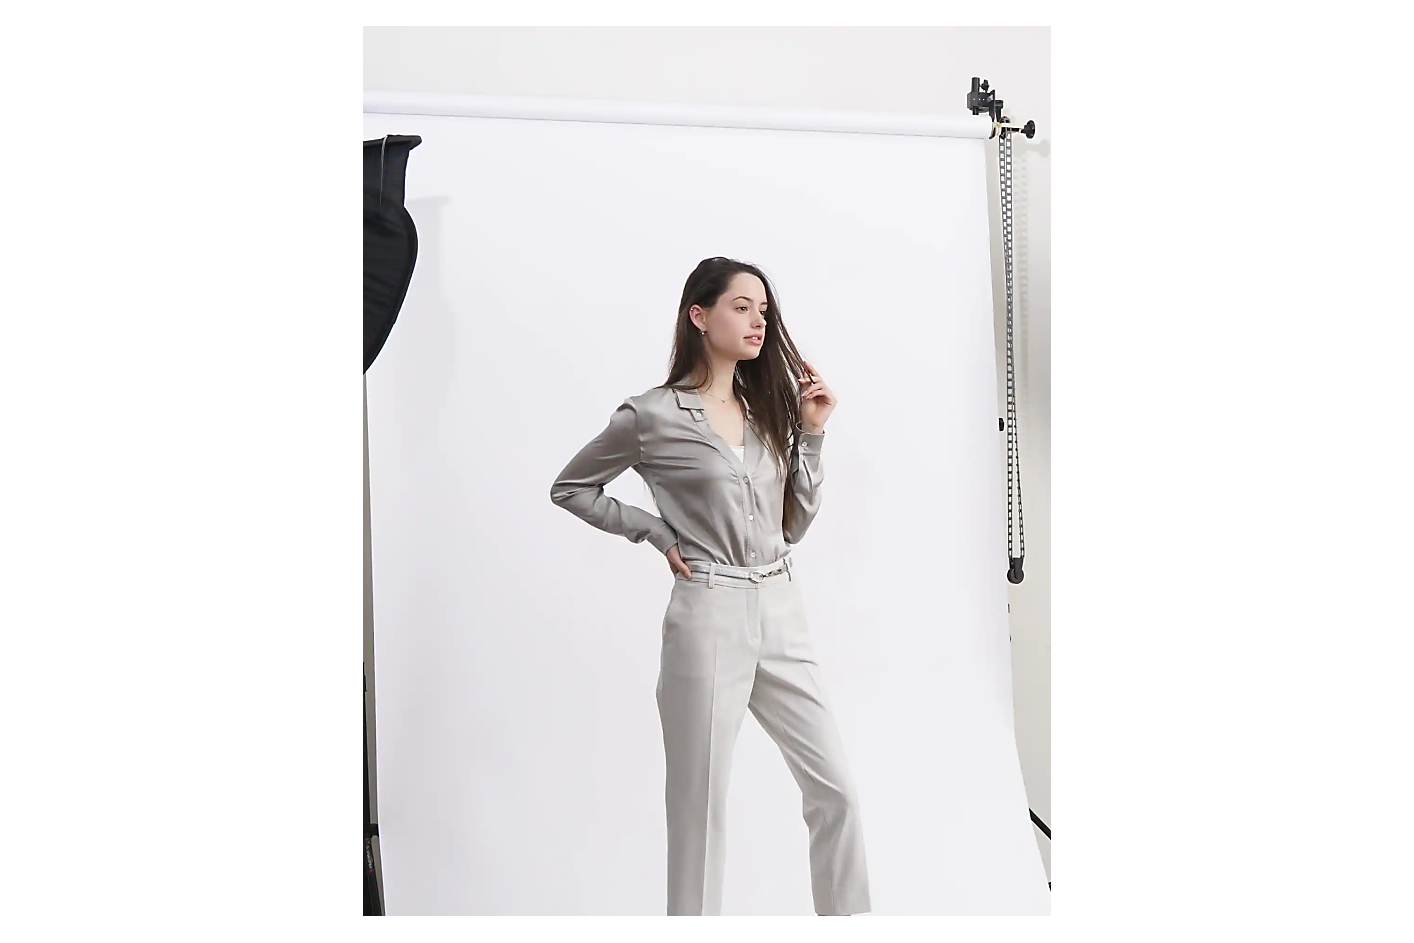 A woman in a light-grey outfit poses in front of a white backdrop in a photo studio.